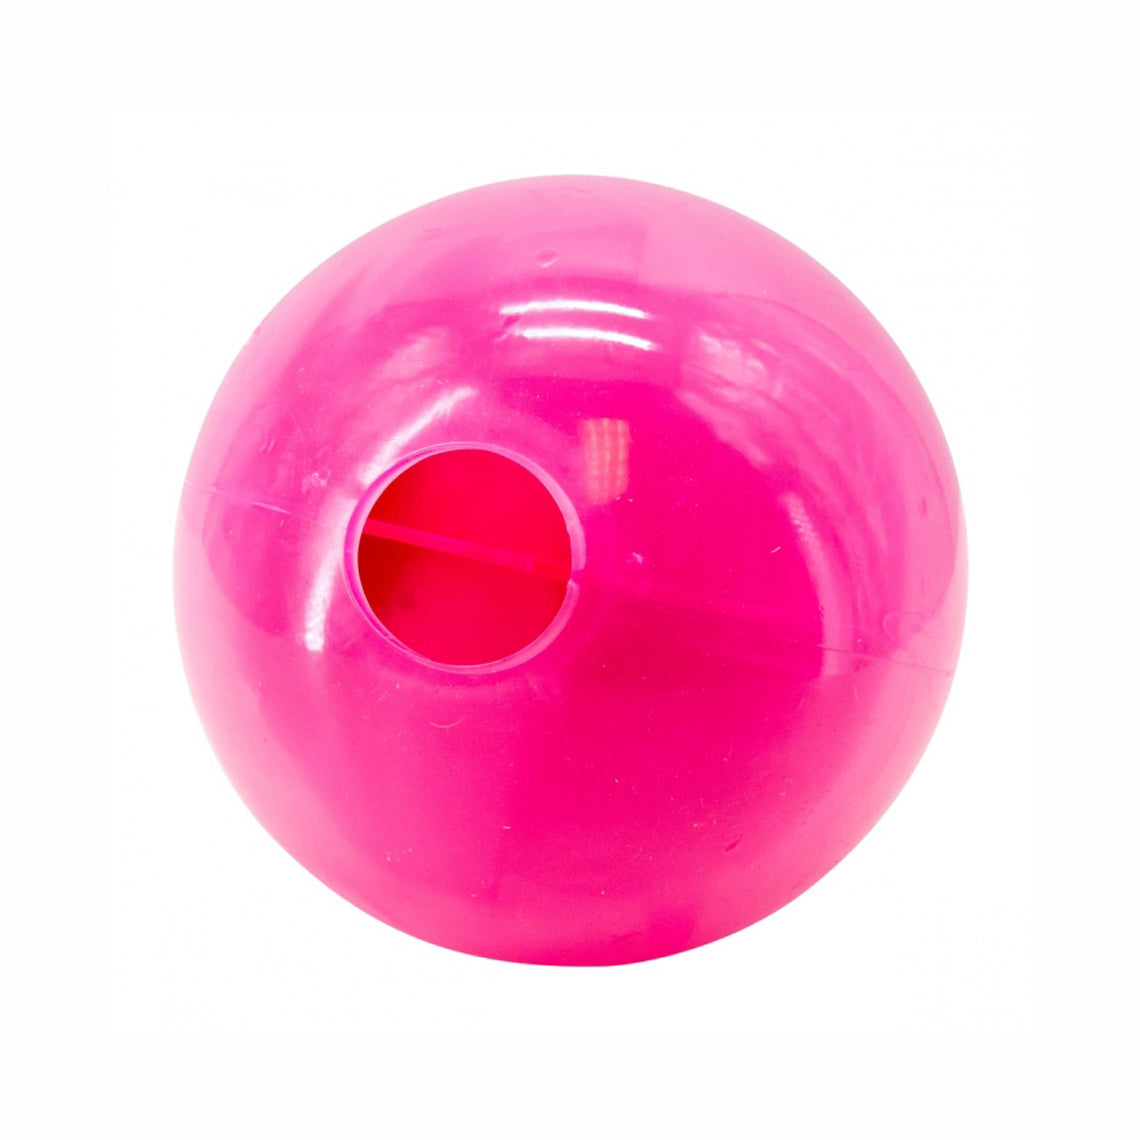 Planet Dog Orbee-Tuff Mazee Puzzle Treat Ball | Only Natural Pet